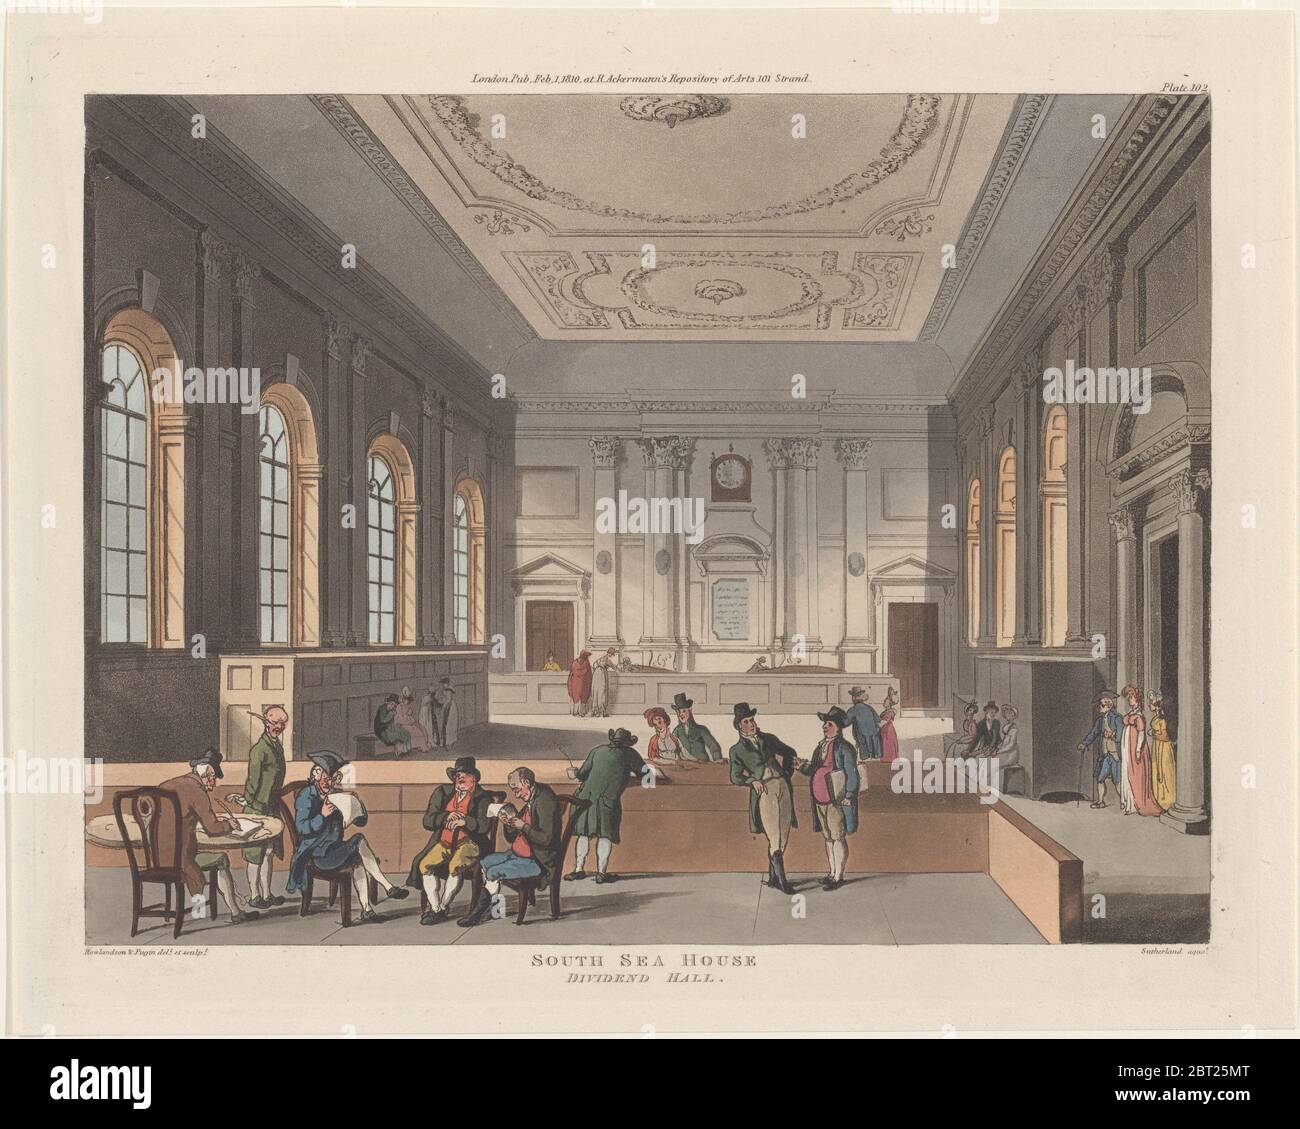 South Sea House, Dividend Hall, February 1, 1810. Stock Photo